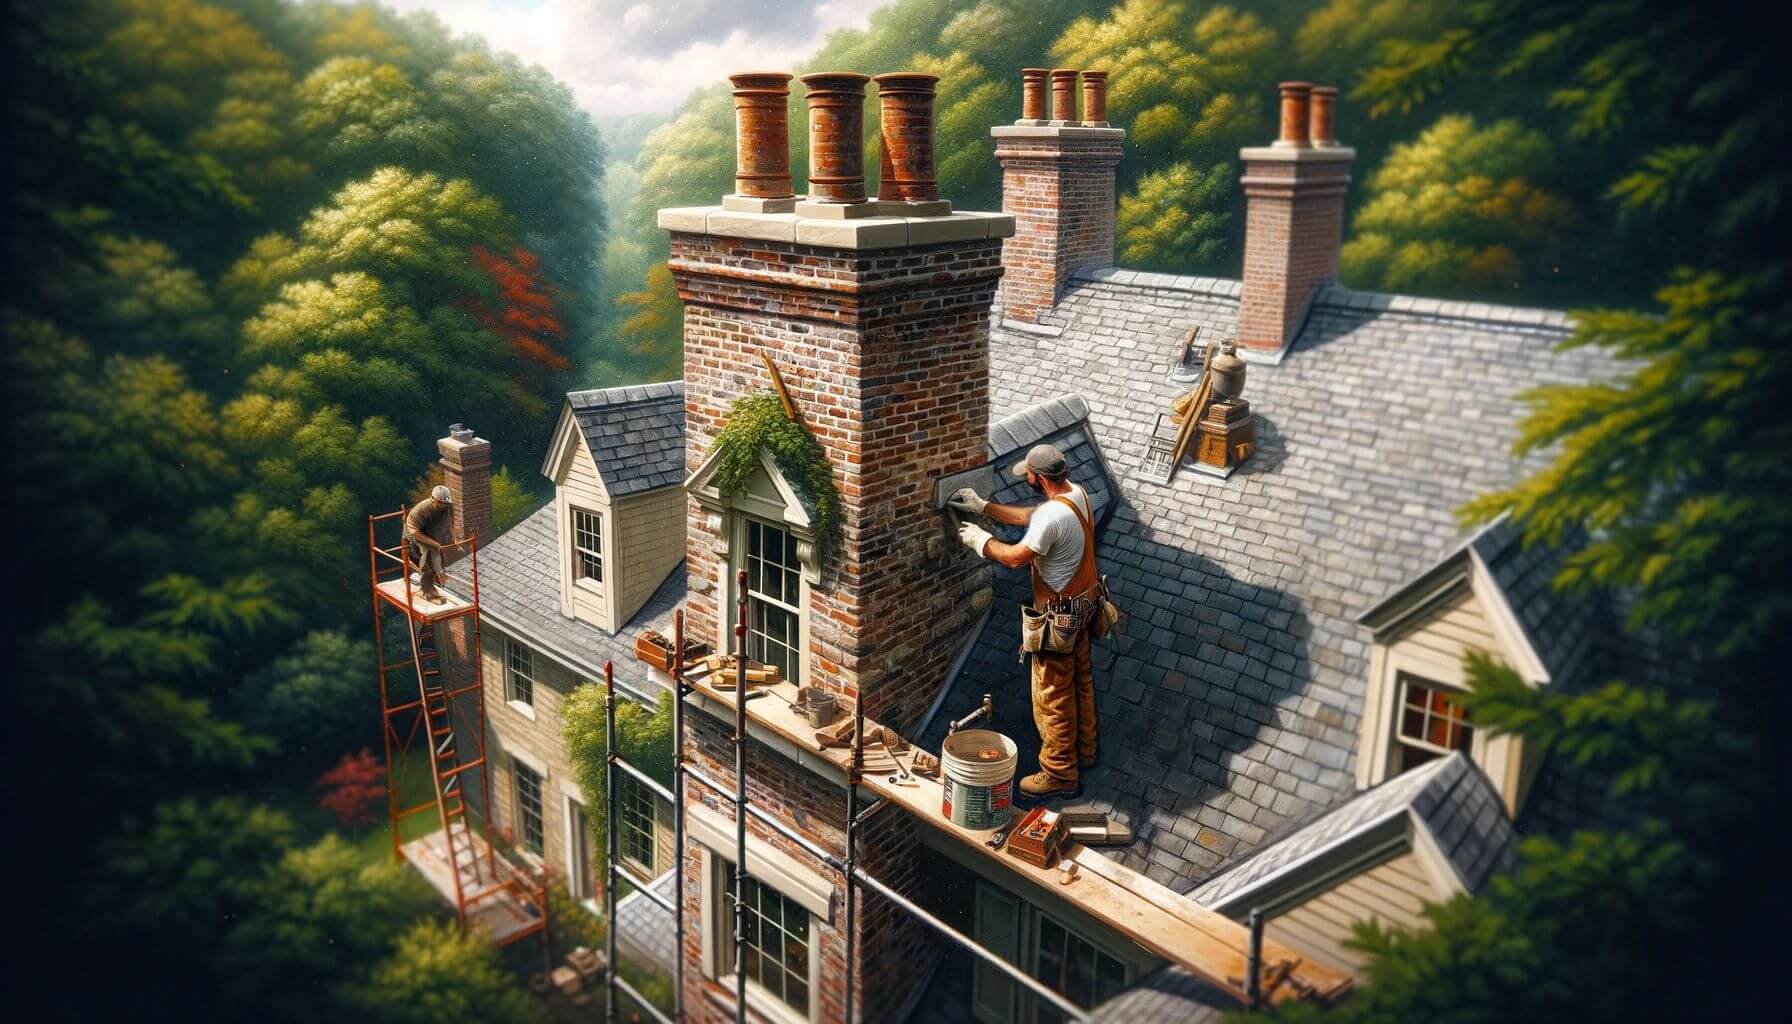 Chimney Repair Bedford NY: Expert Services for Your Home